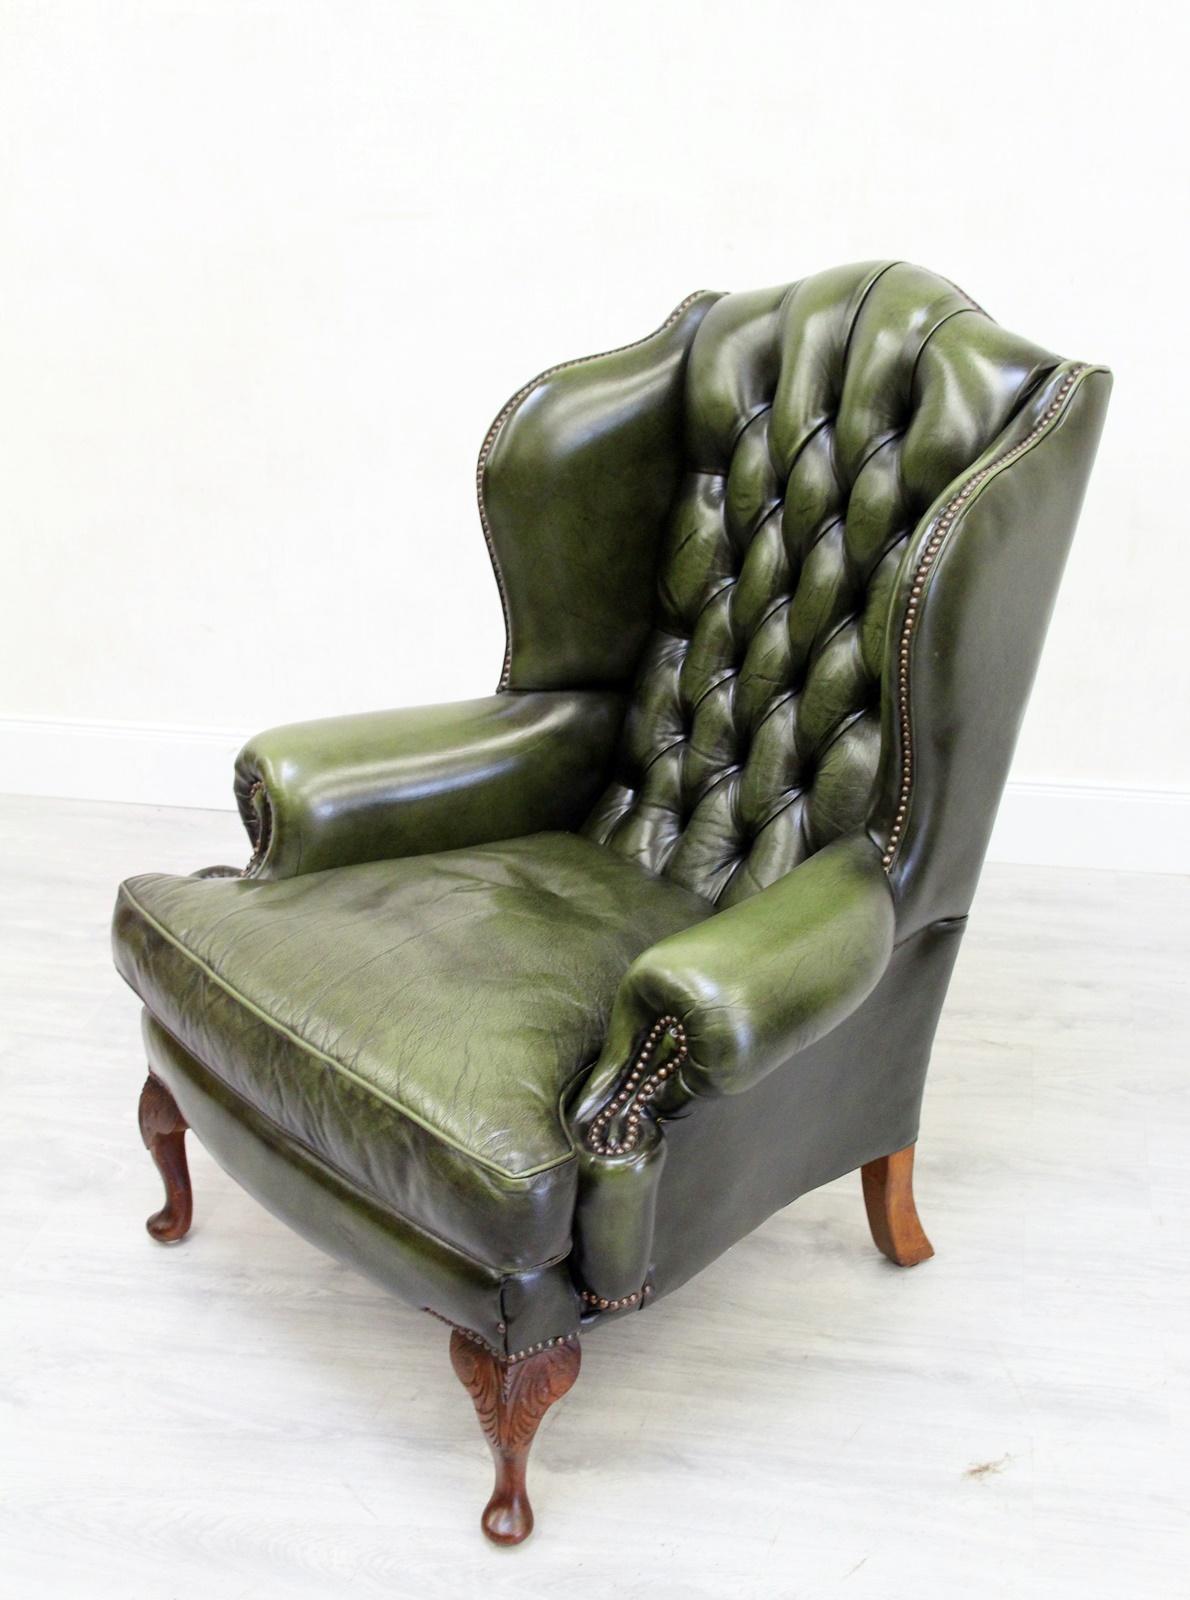 2 Chesterfield Wing Chair Armchair Recliner Antique For Sale 2